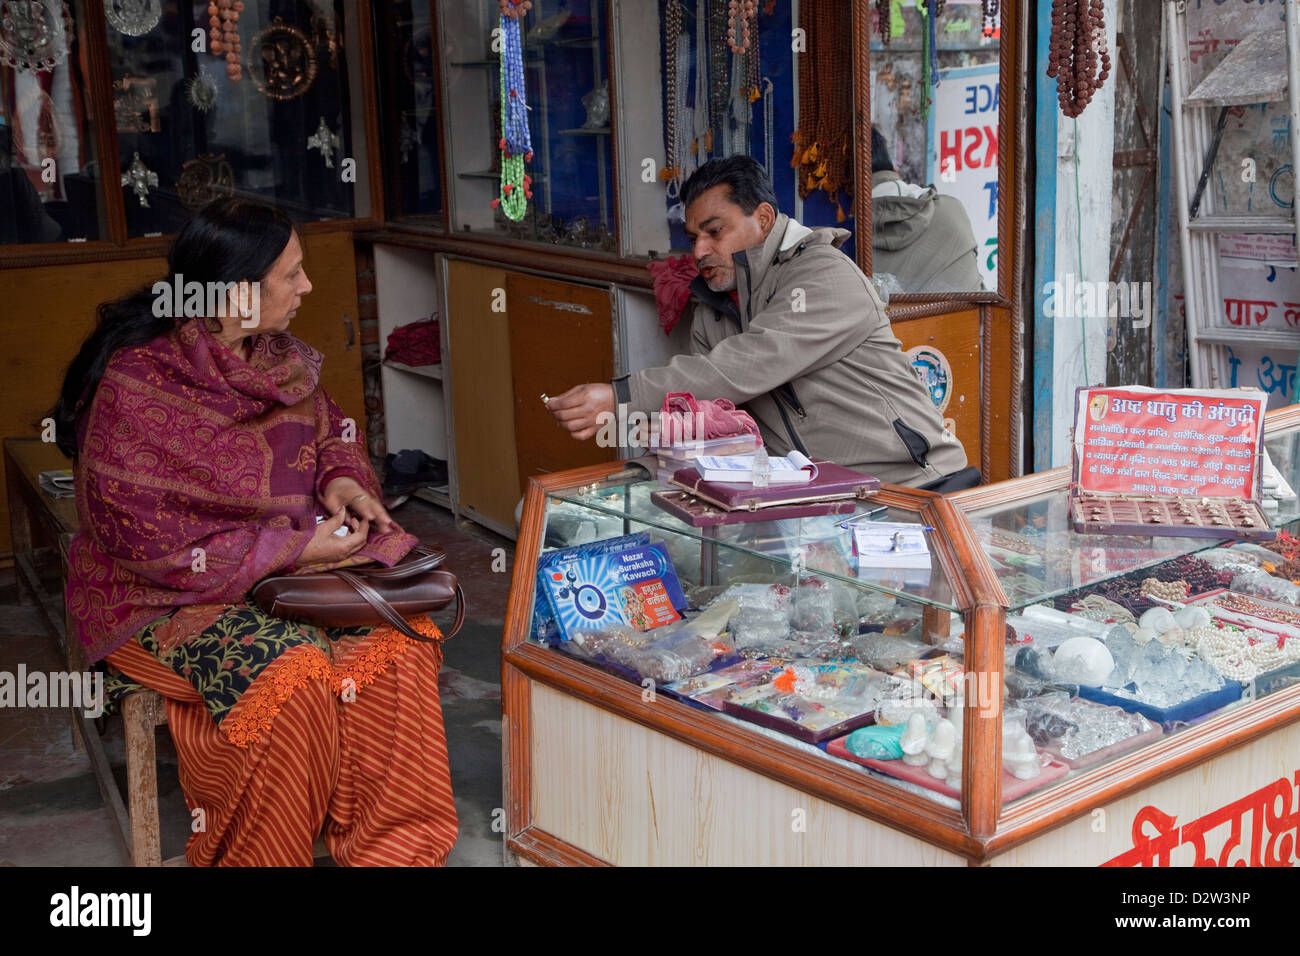 India, Rishikesh. Woman Discussing a Purchase in Jeweler's Shop. Stock Photo